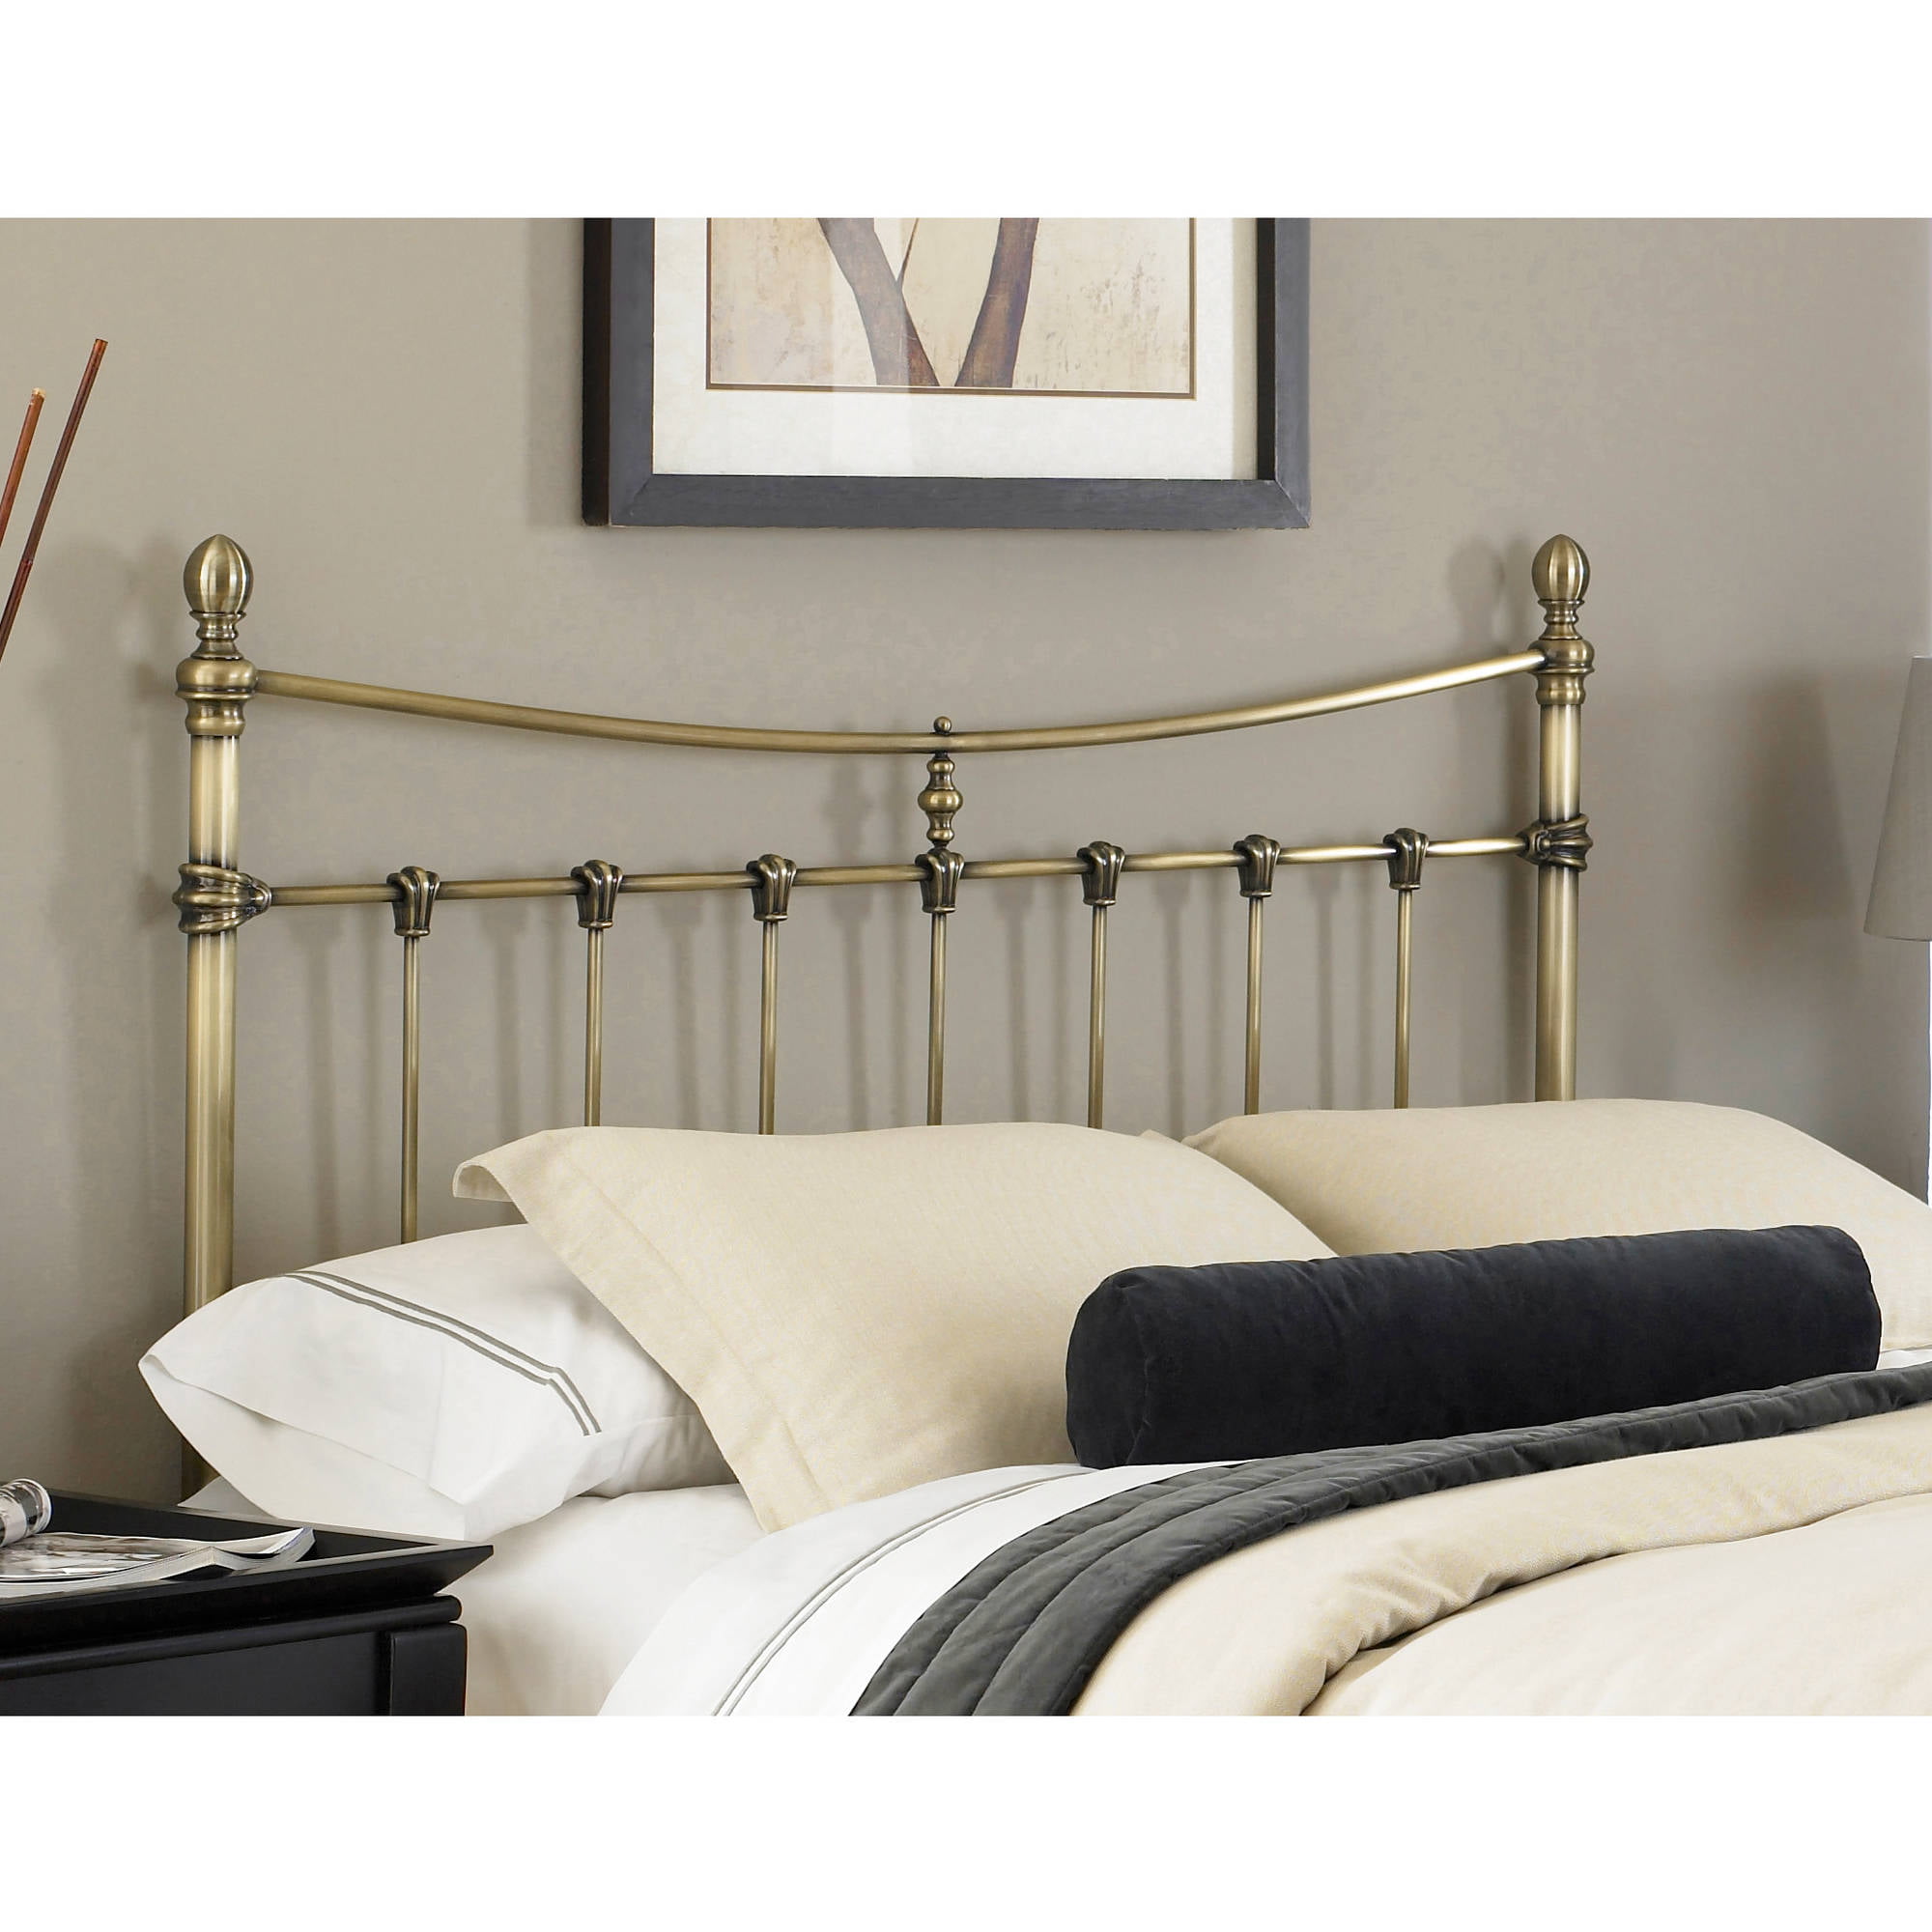 Leighton Metal Headboard Panel with Straight-Lined Spindles and Scalloped  Castings, Glazed Brass Finish, Full 